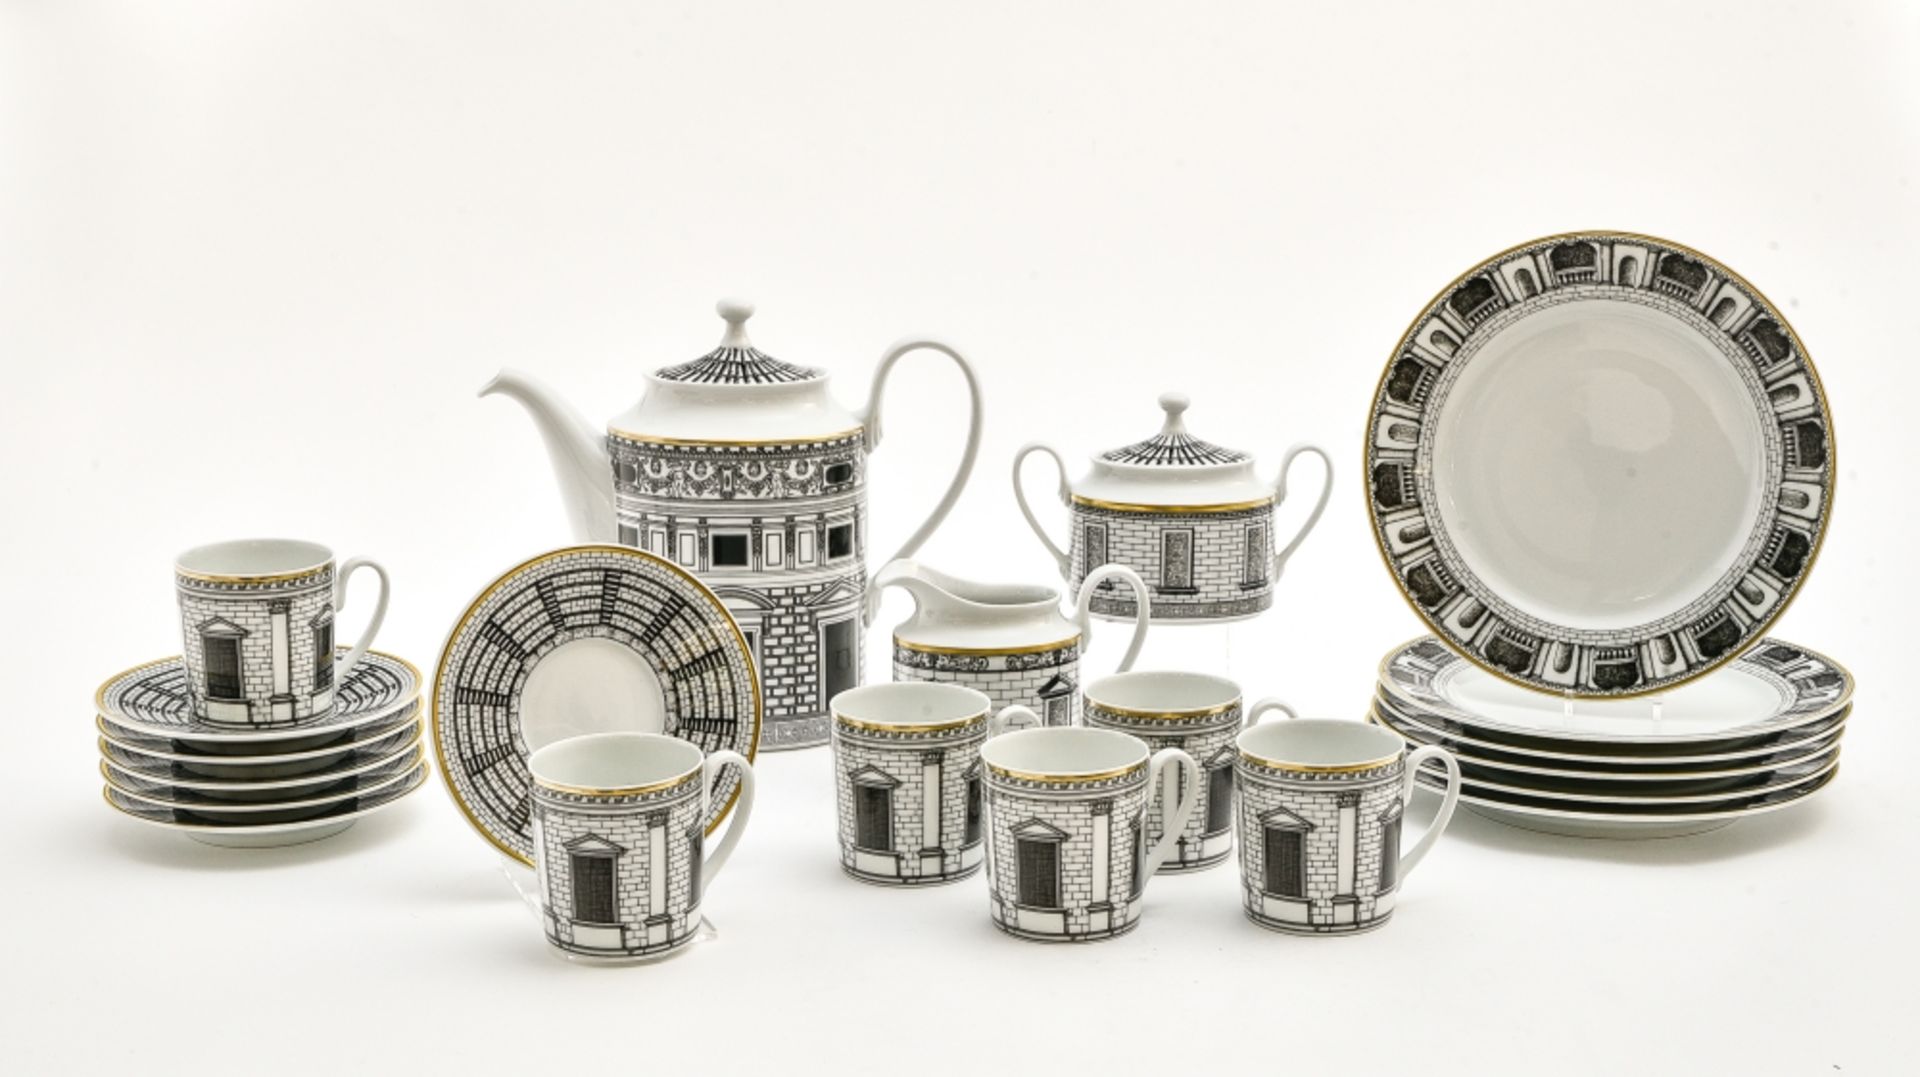 Piero FORNASETTI (1913-1988) & Rosenthal Part of a Palladiana service composed of a coffee pot, a